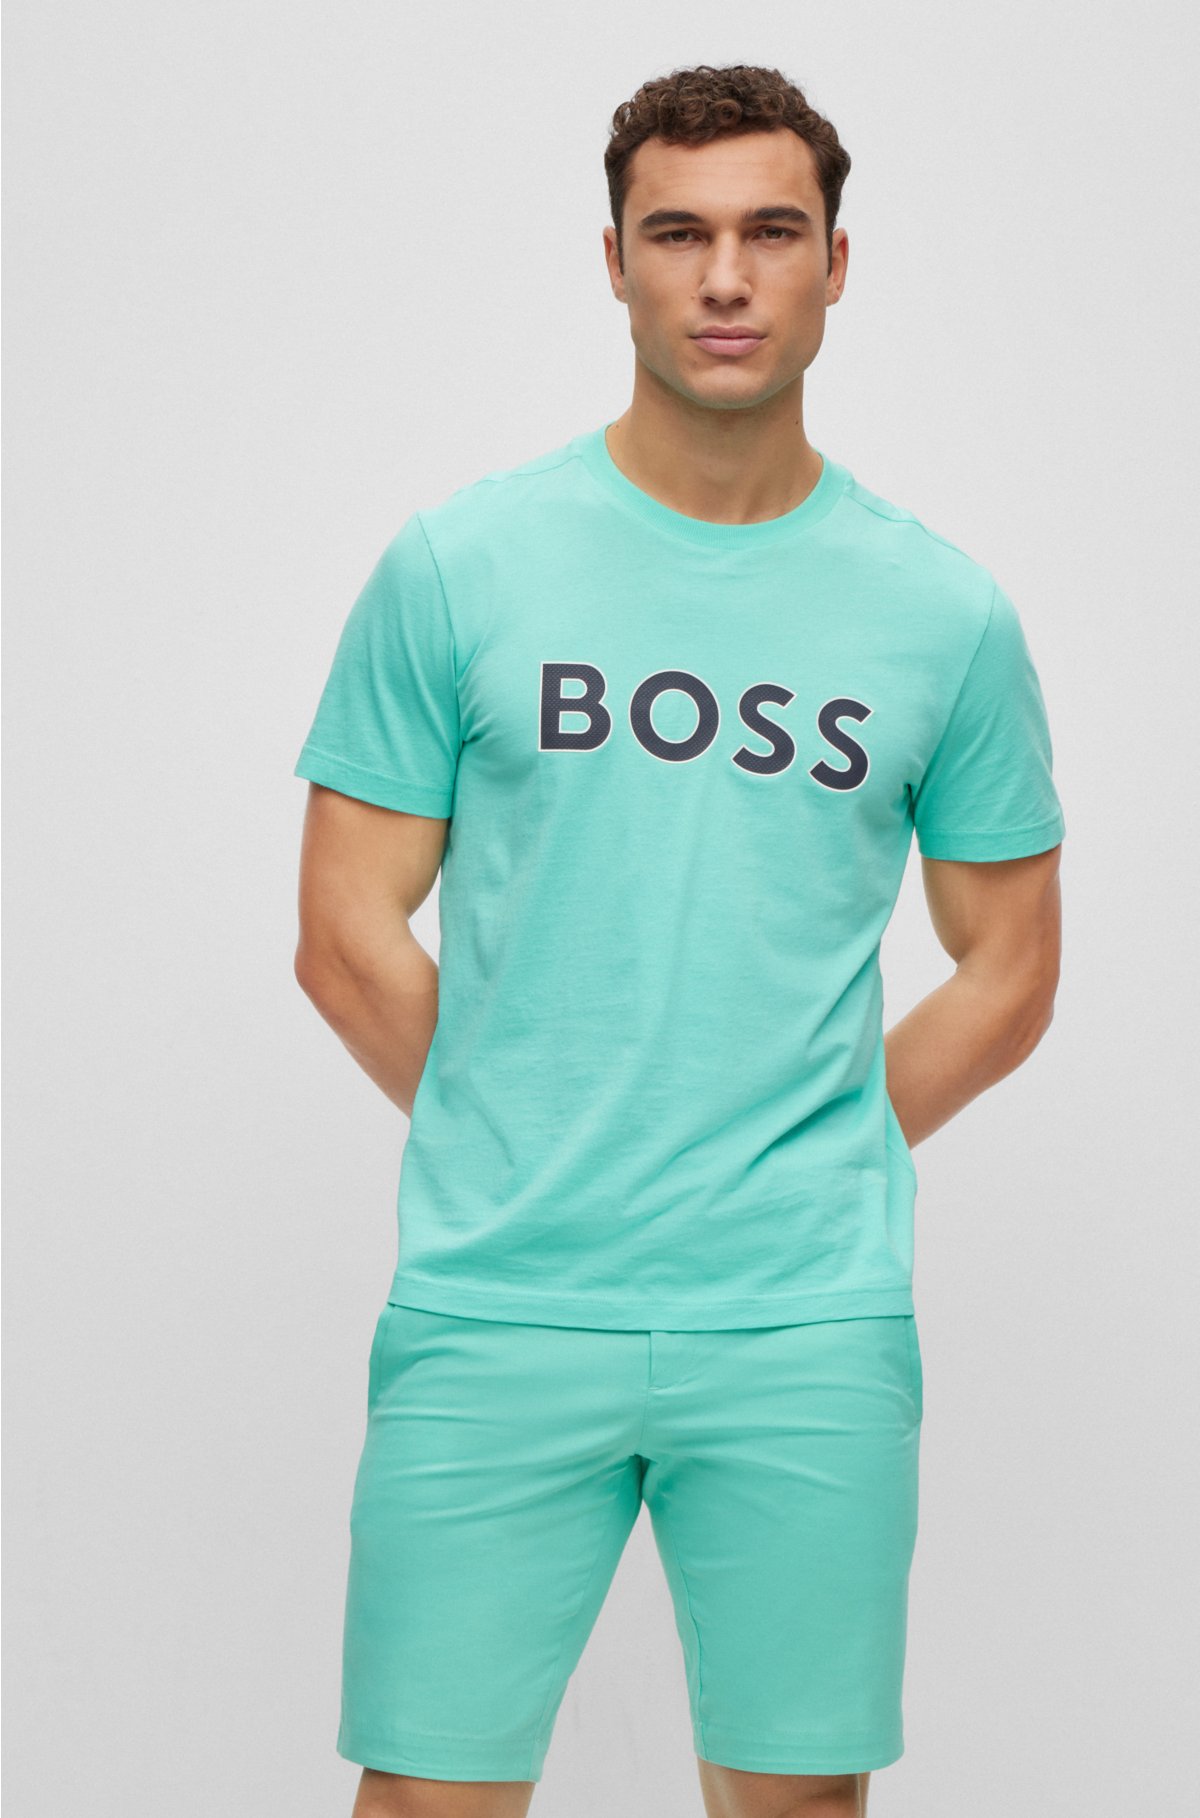 cotton print jersey with T-shirt BOSS - logo in Crew-neck